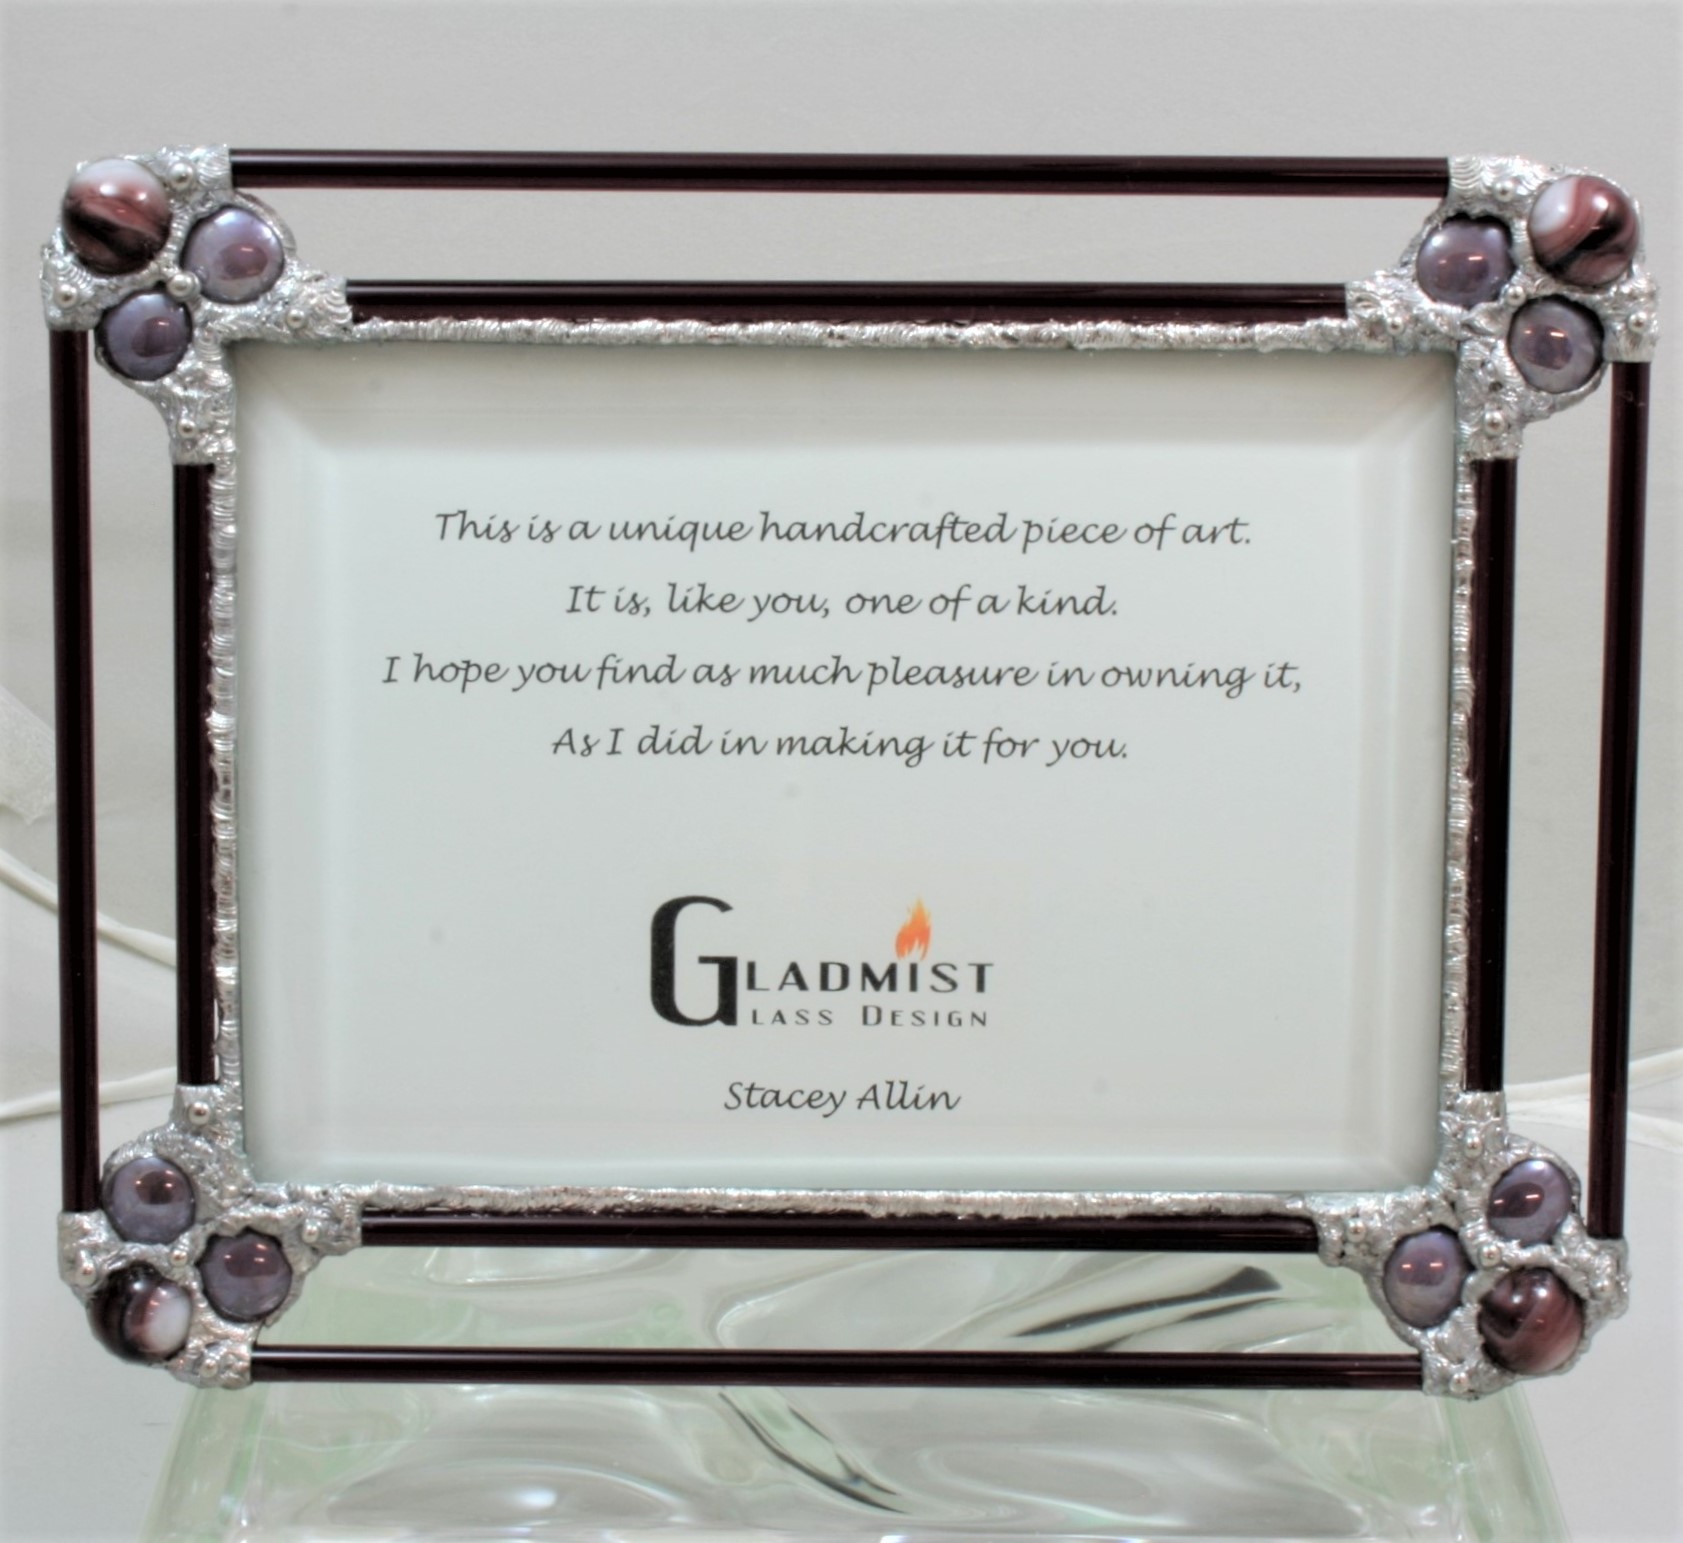 Purple glass frame by Gladmist Glass Design. Frame is made to fit a 5x7 picture under beveled glass. Can be displayed in horizontal or vertical position. Frame is made using glass rods, glass nuggets and glass marbles with decorative soldering.